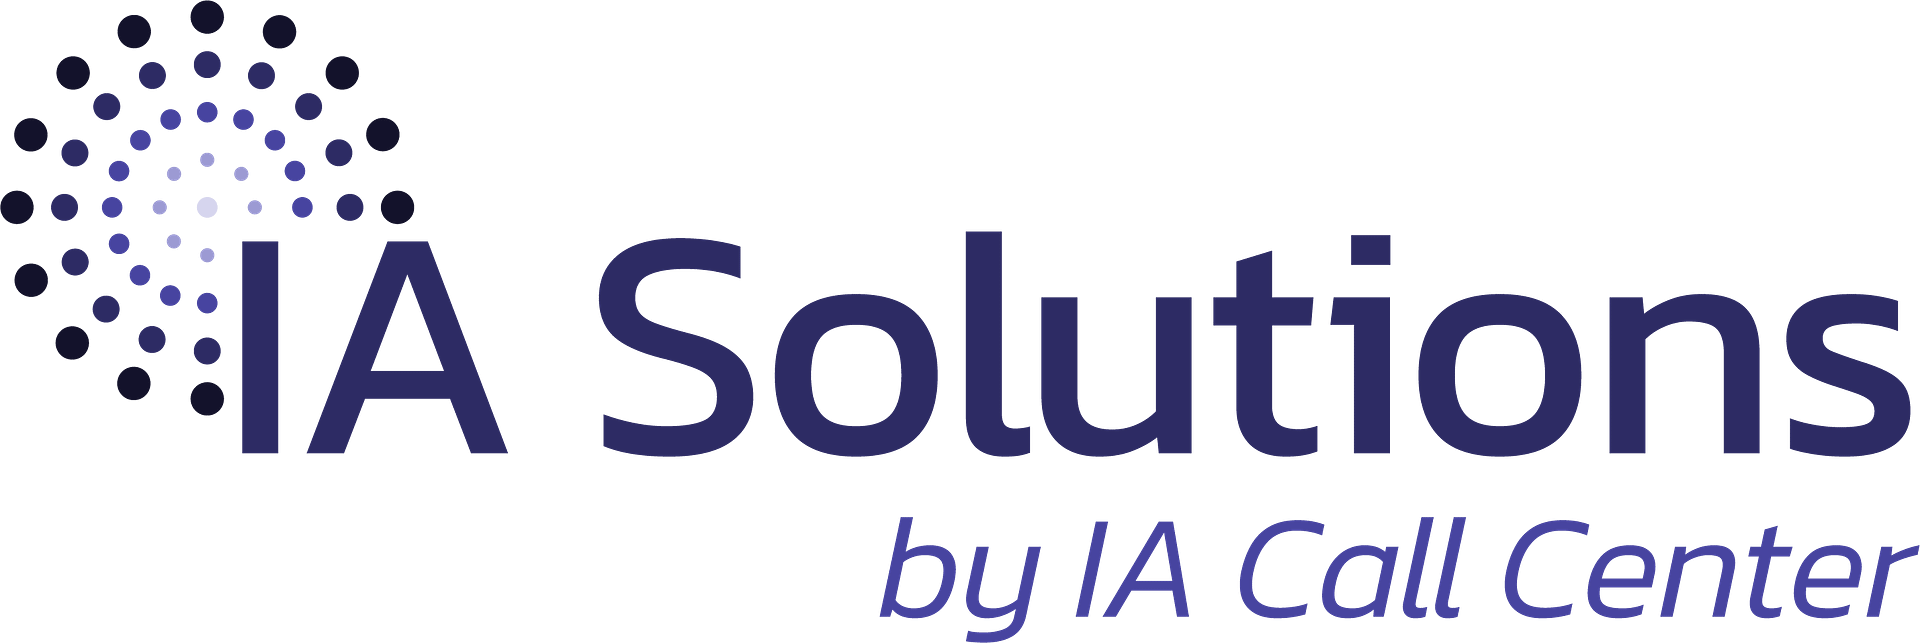 IA Solutions by IA Call Center